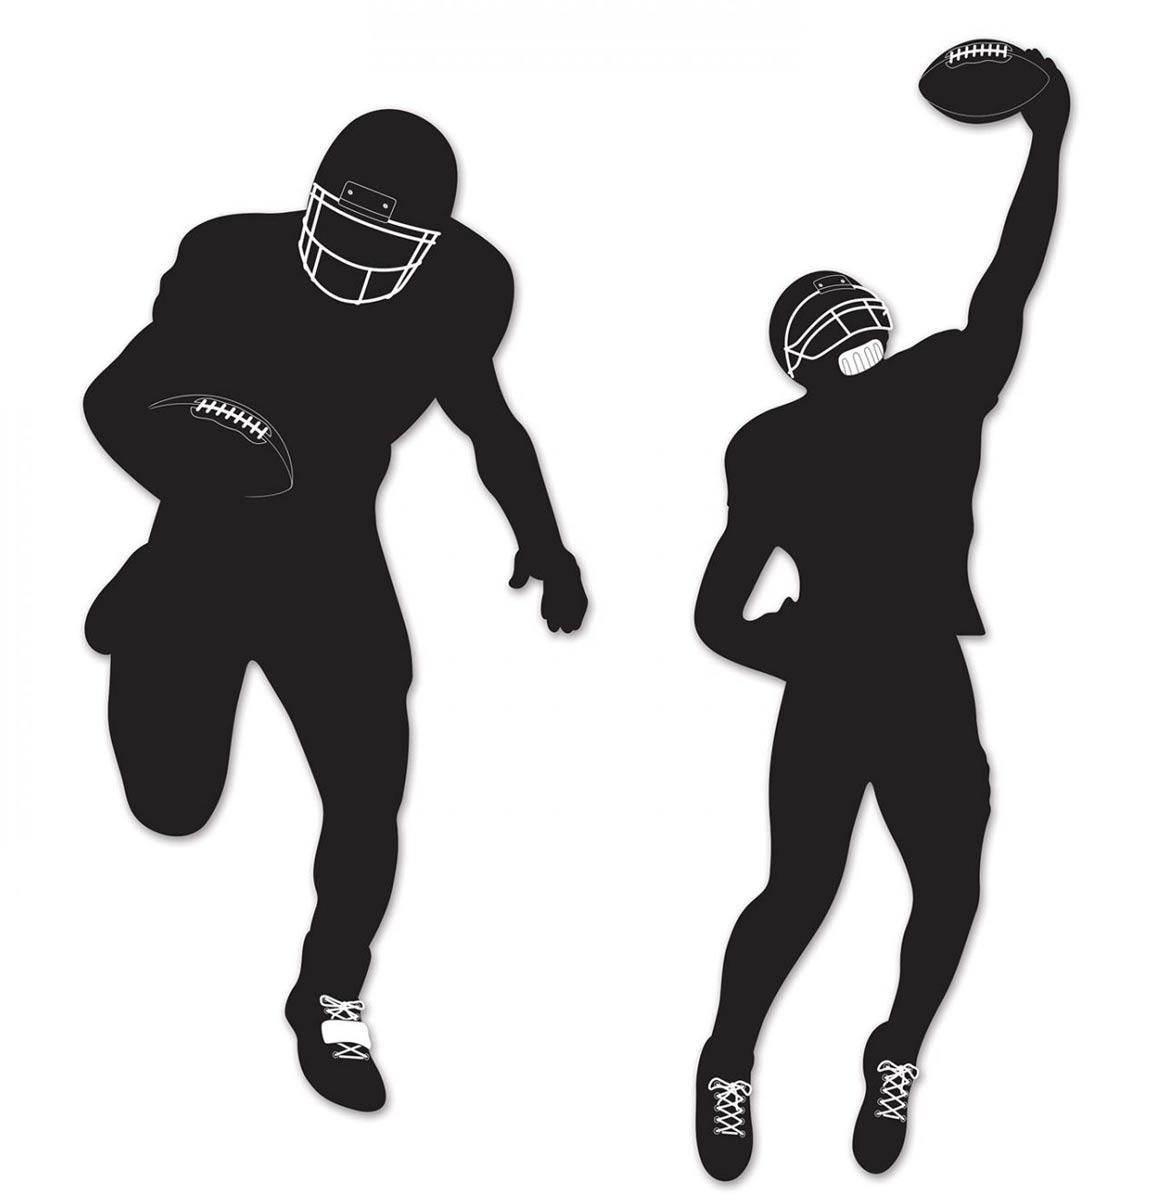 Pack of 2 American NFL Football Silhouettes by Beistle 50280 available in the UK here at Karnival Costumes online party shop